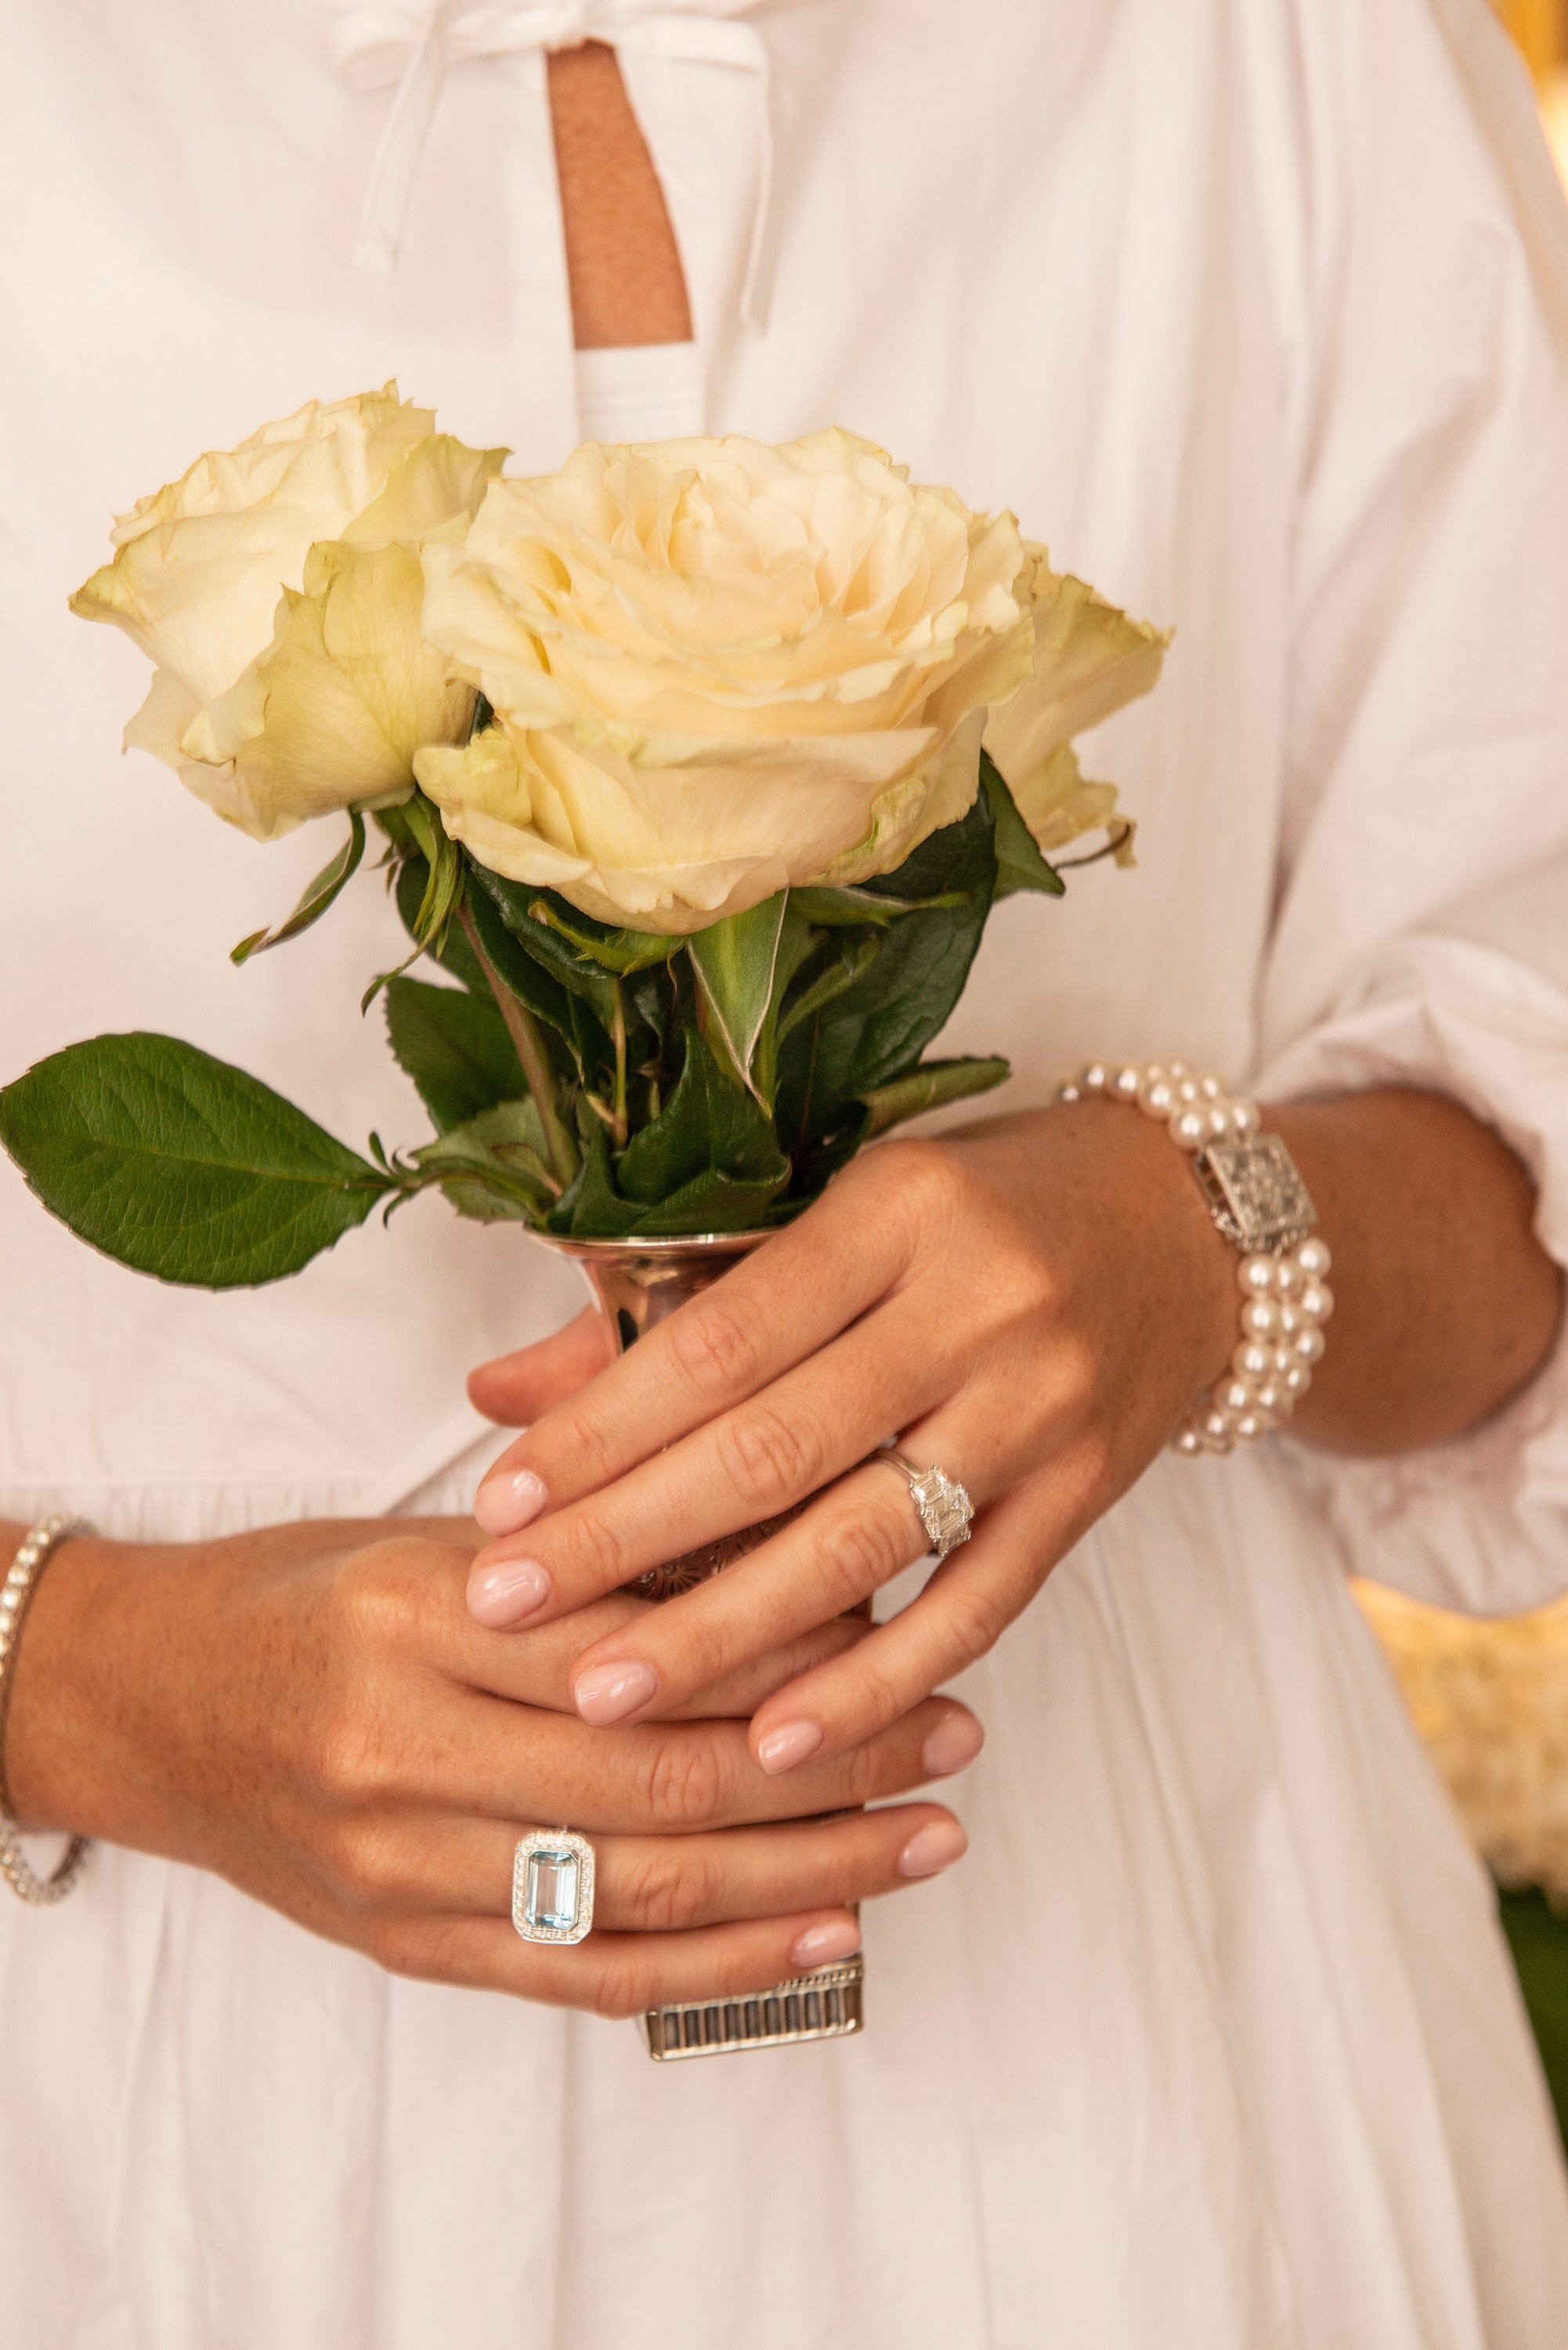 Jewels For Your Big Day!